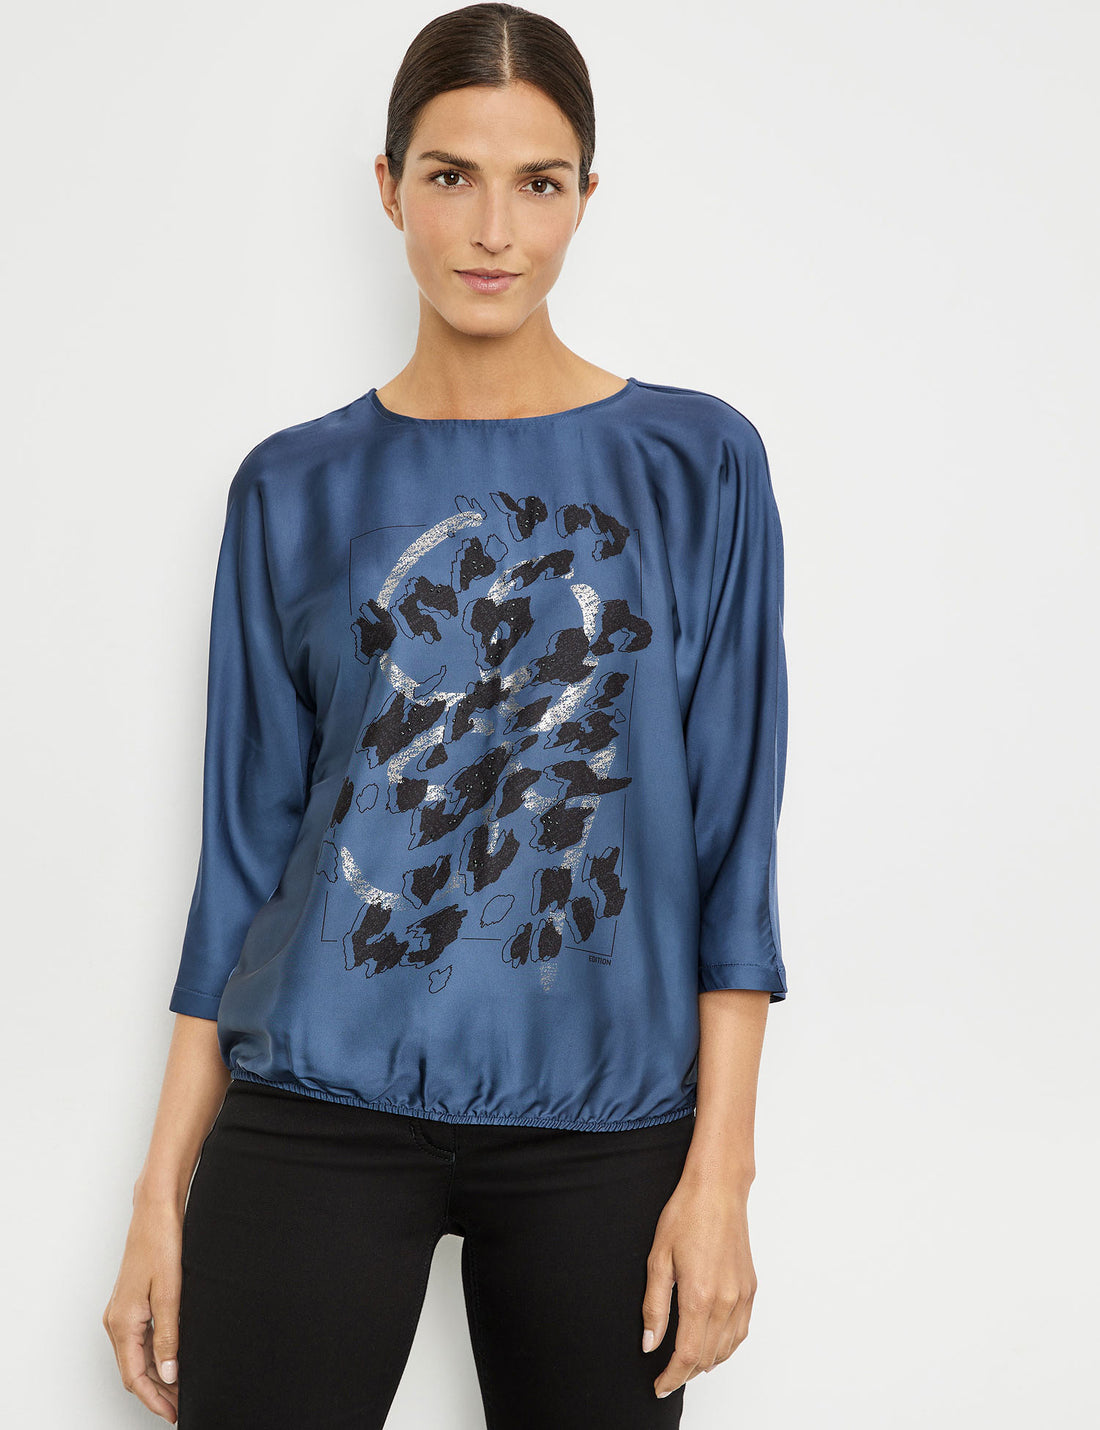 Blouse Top With Fabric Panelling And A Front Print_170095-44002_80929_01